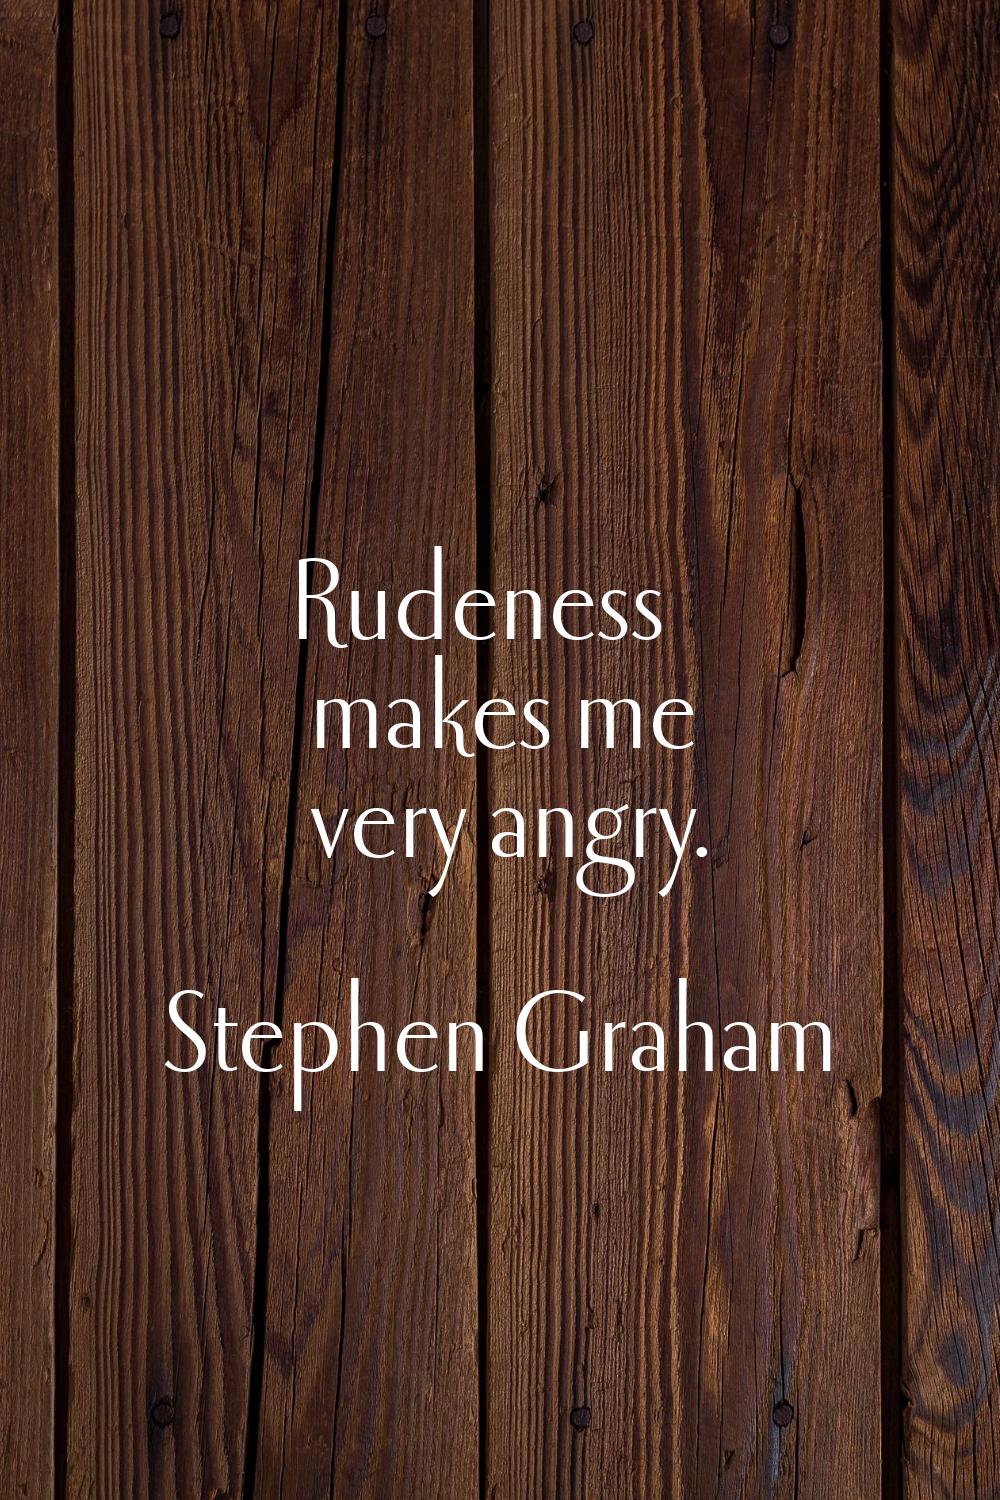 Rudeness makes me very angry.